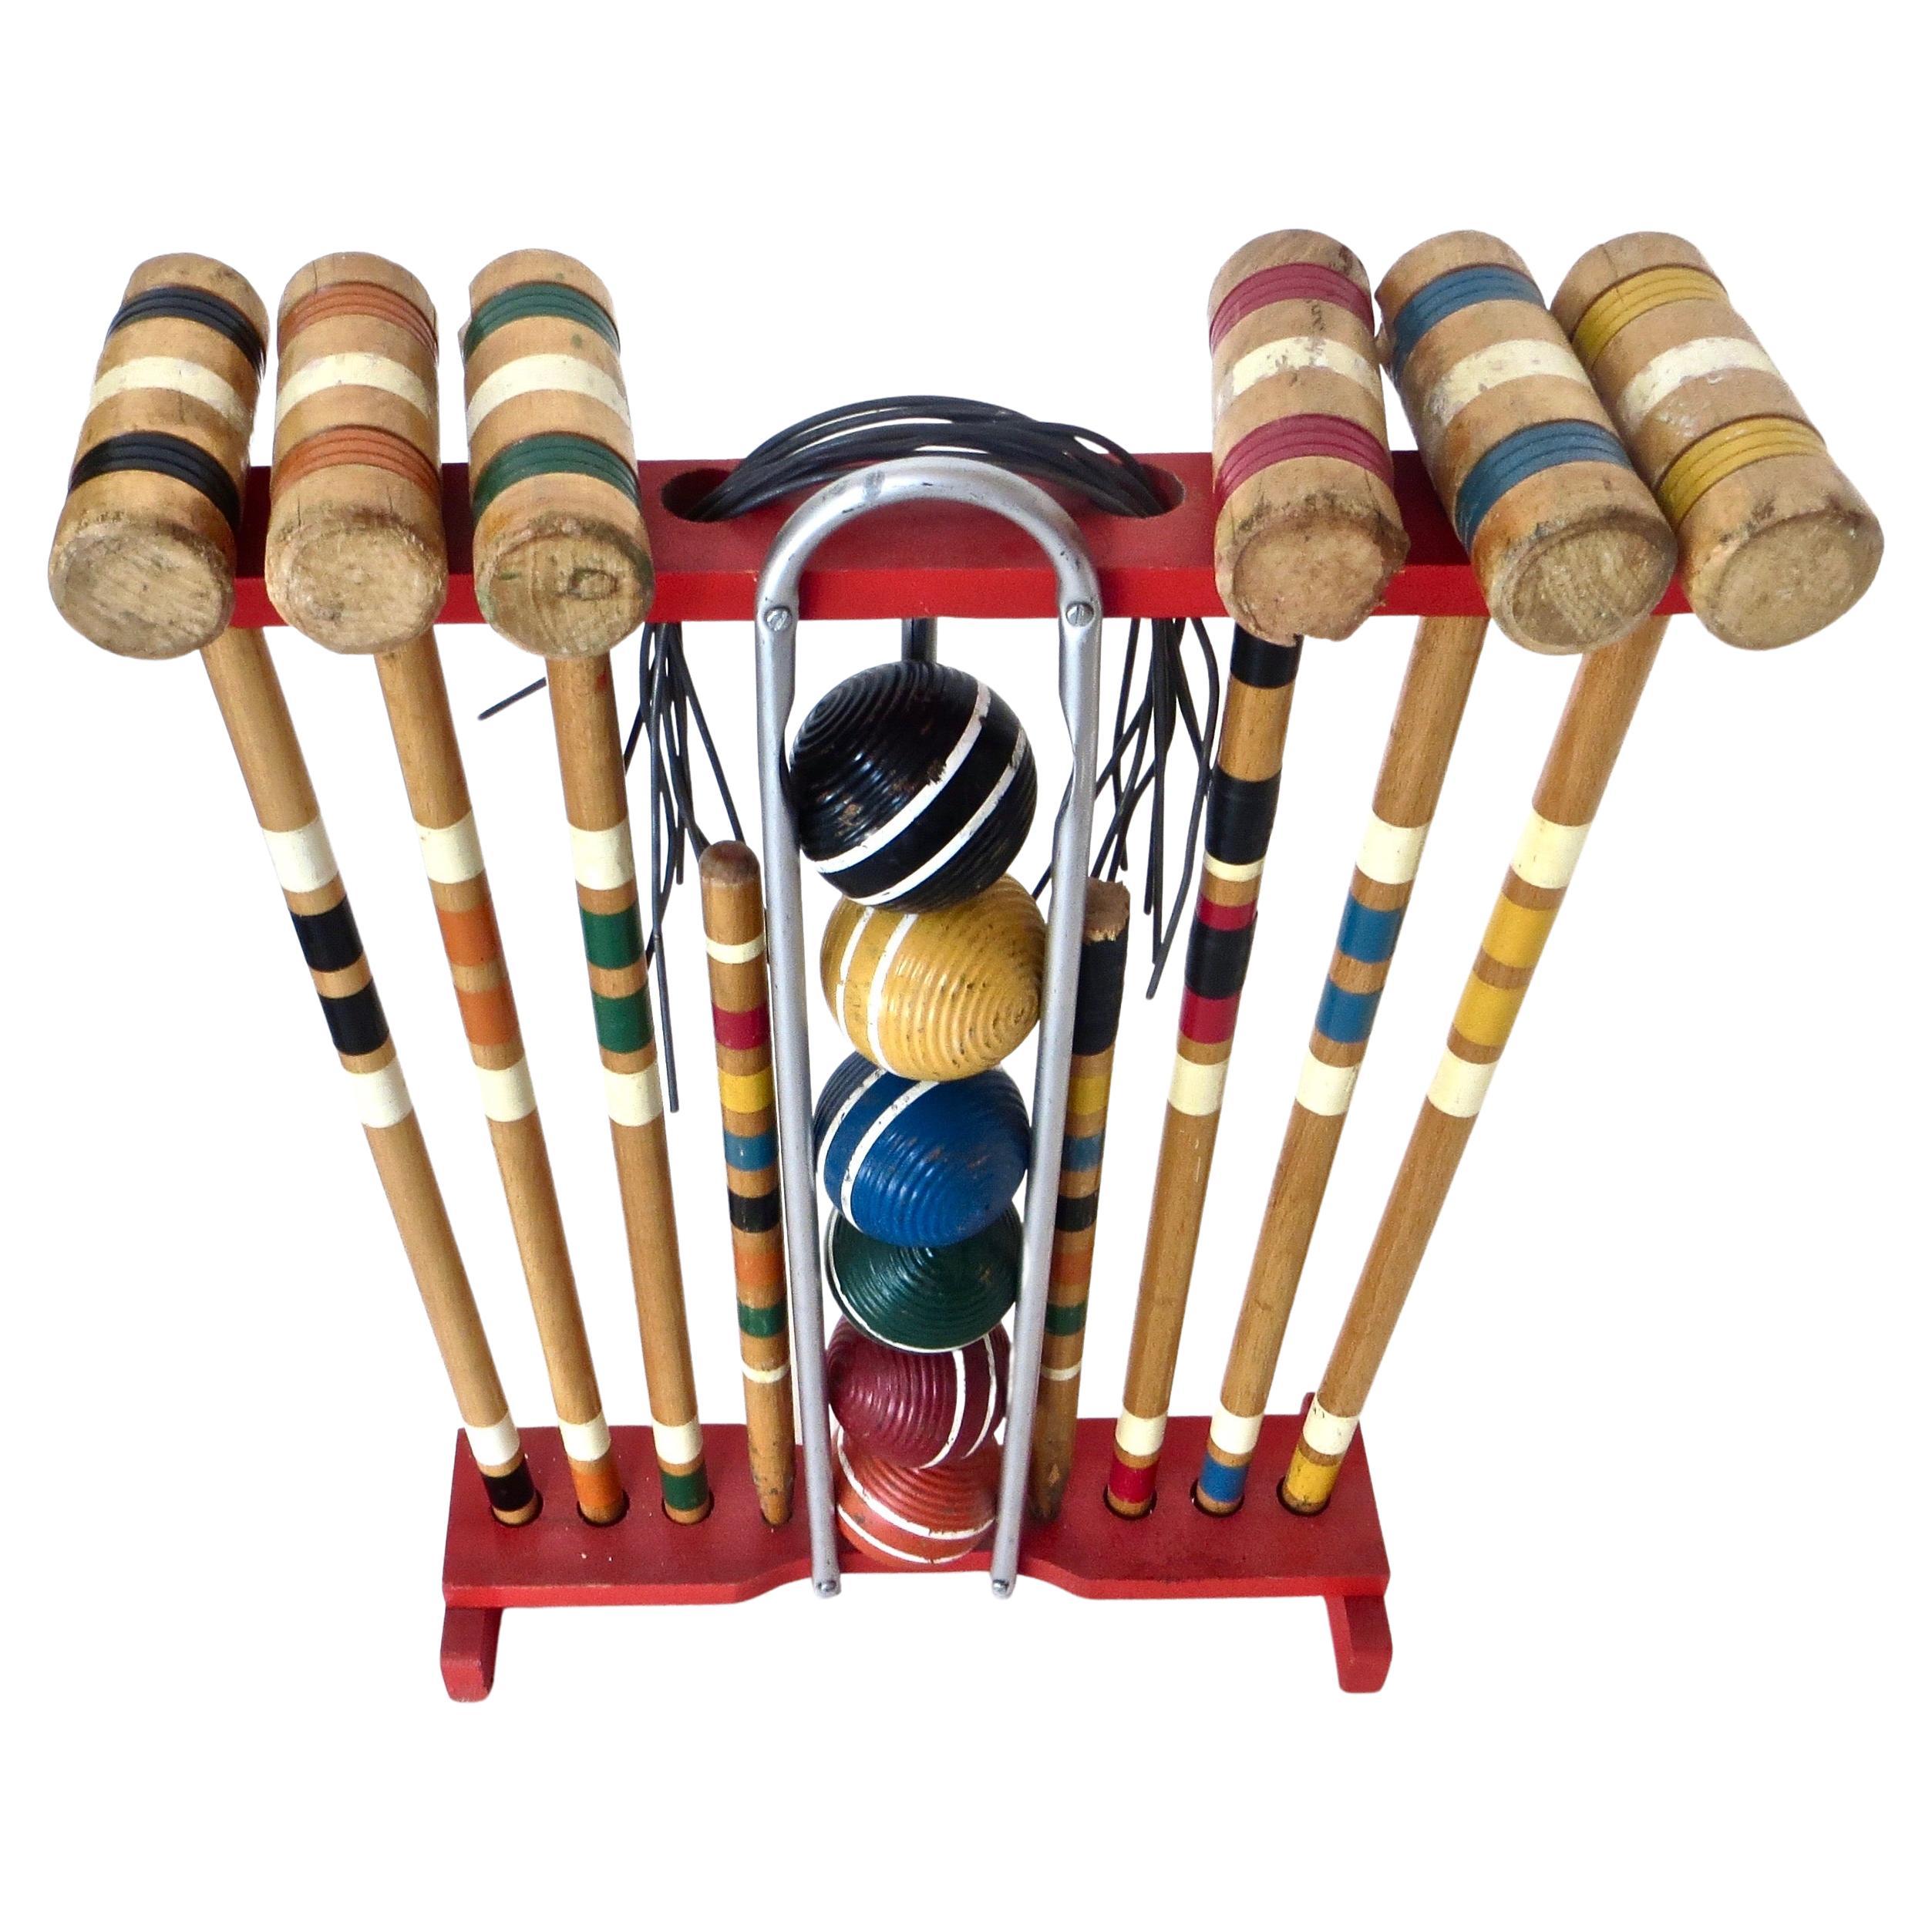 American 1940s Wooden Croquet Set on Stand; for Six Players; Complete